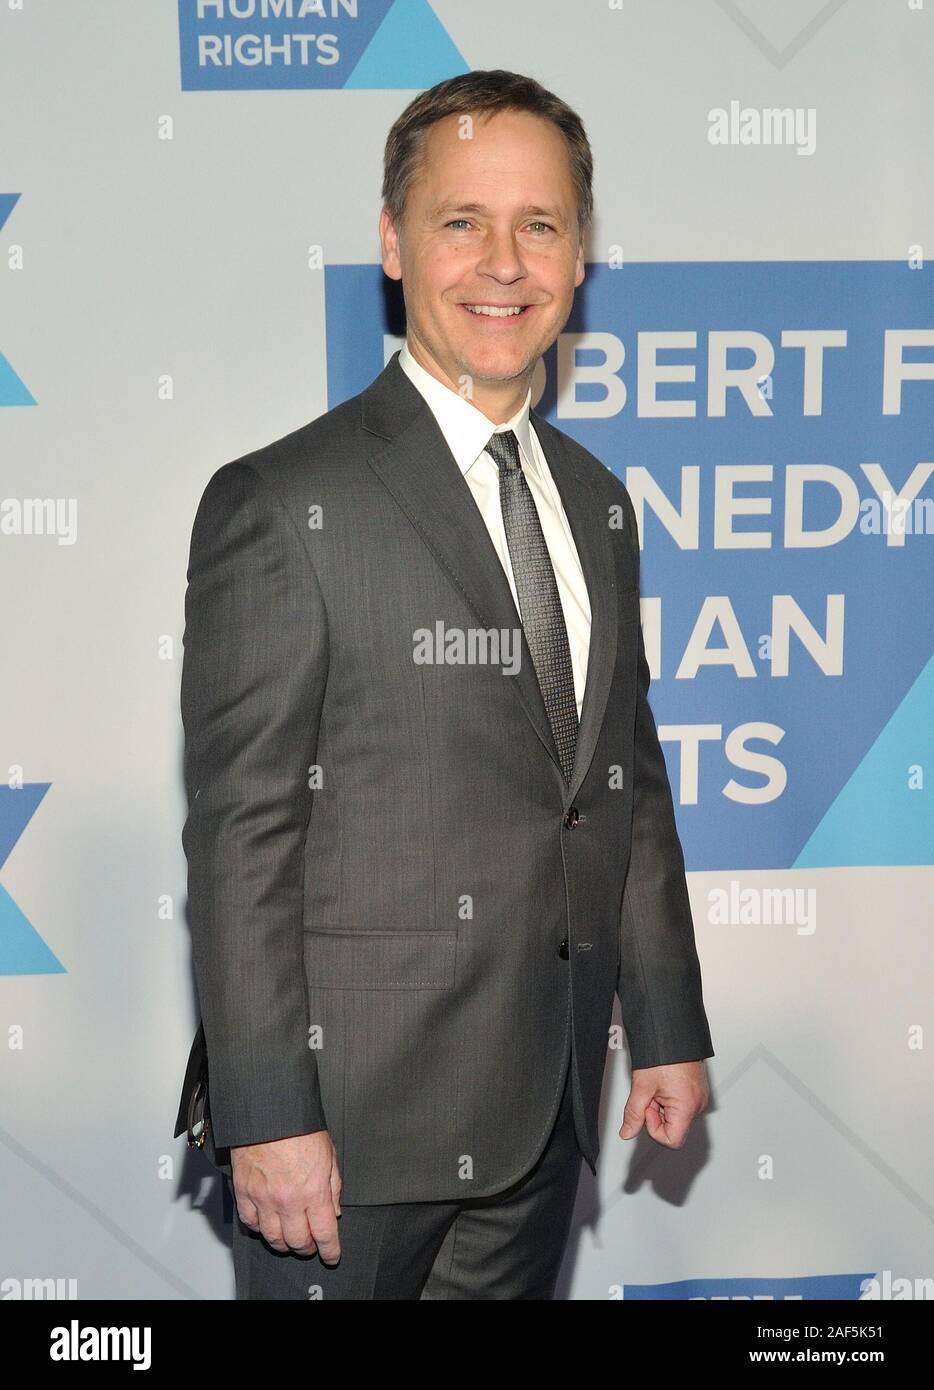 New York, USA. 12th Dec, 2019. Actor Chad Lowe attends the Robert F. Kennedy Ripple of Hope Awards at the NY Hilton in New York, NY on December 12, 2019. (Photo by Stephen Smith/SIPA USA) Credit: Sipa USA/Alamy Live News Stock Photo